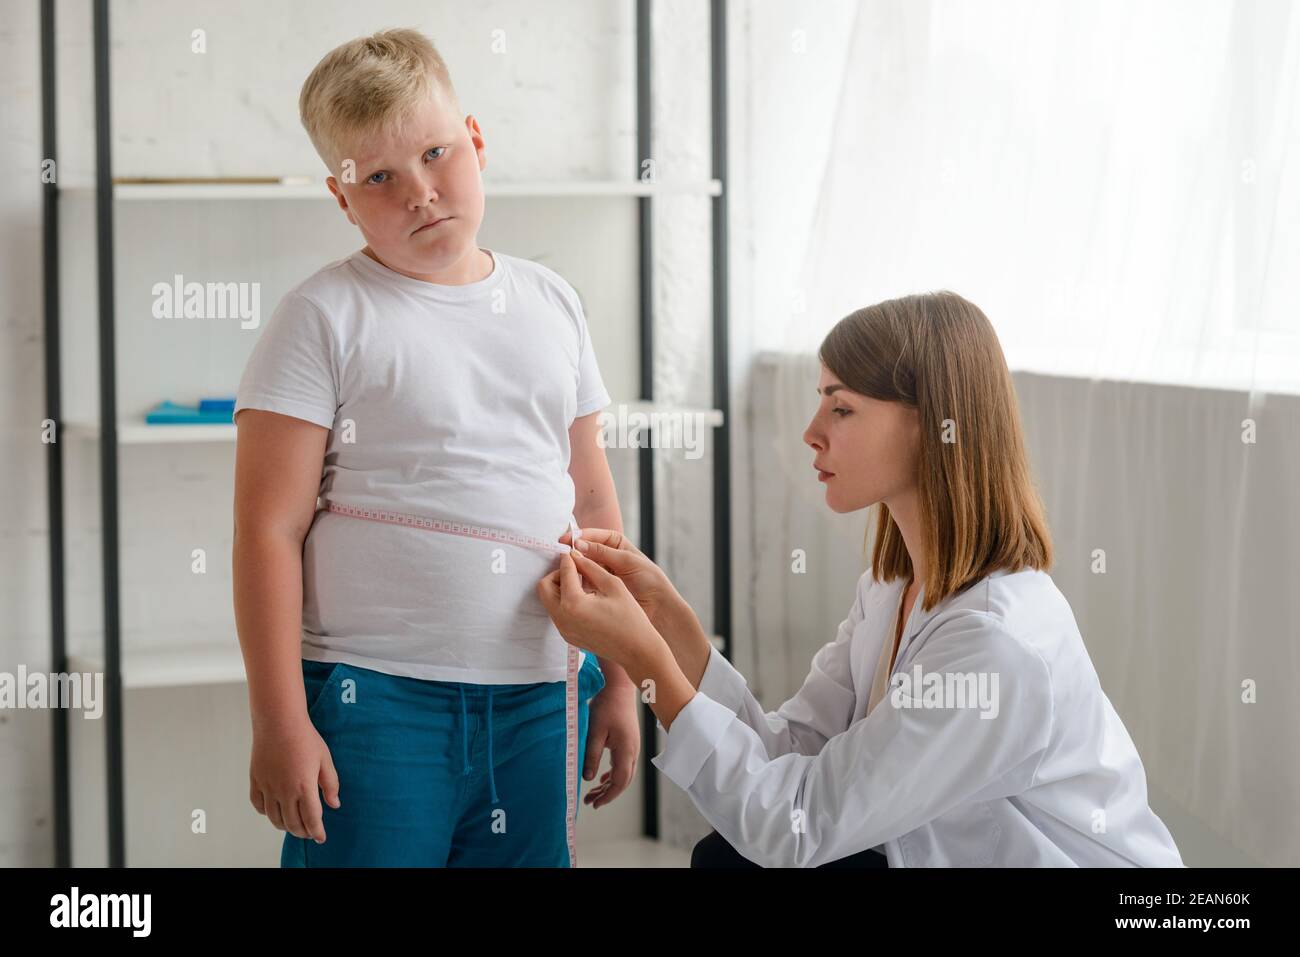 Upset boy during waistline measurement at a nutritionist's appointment Stock Photo